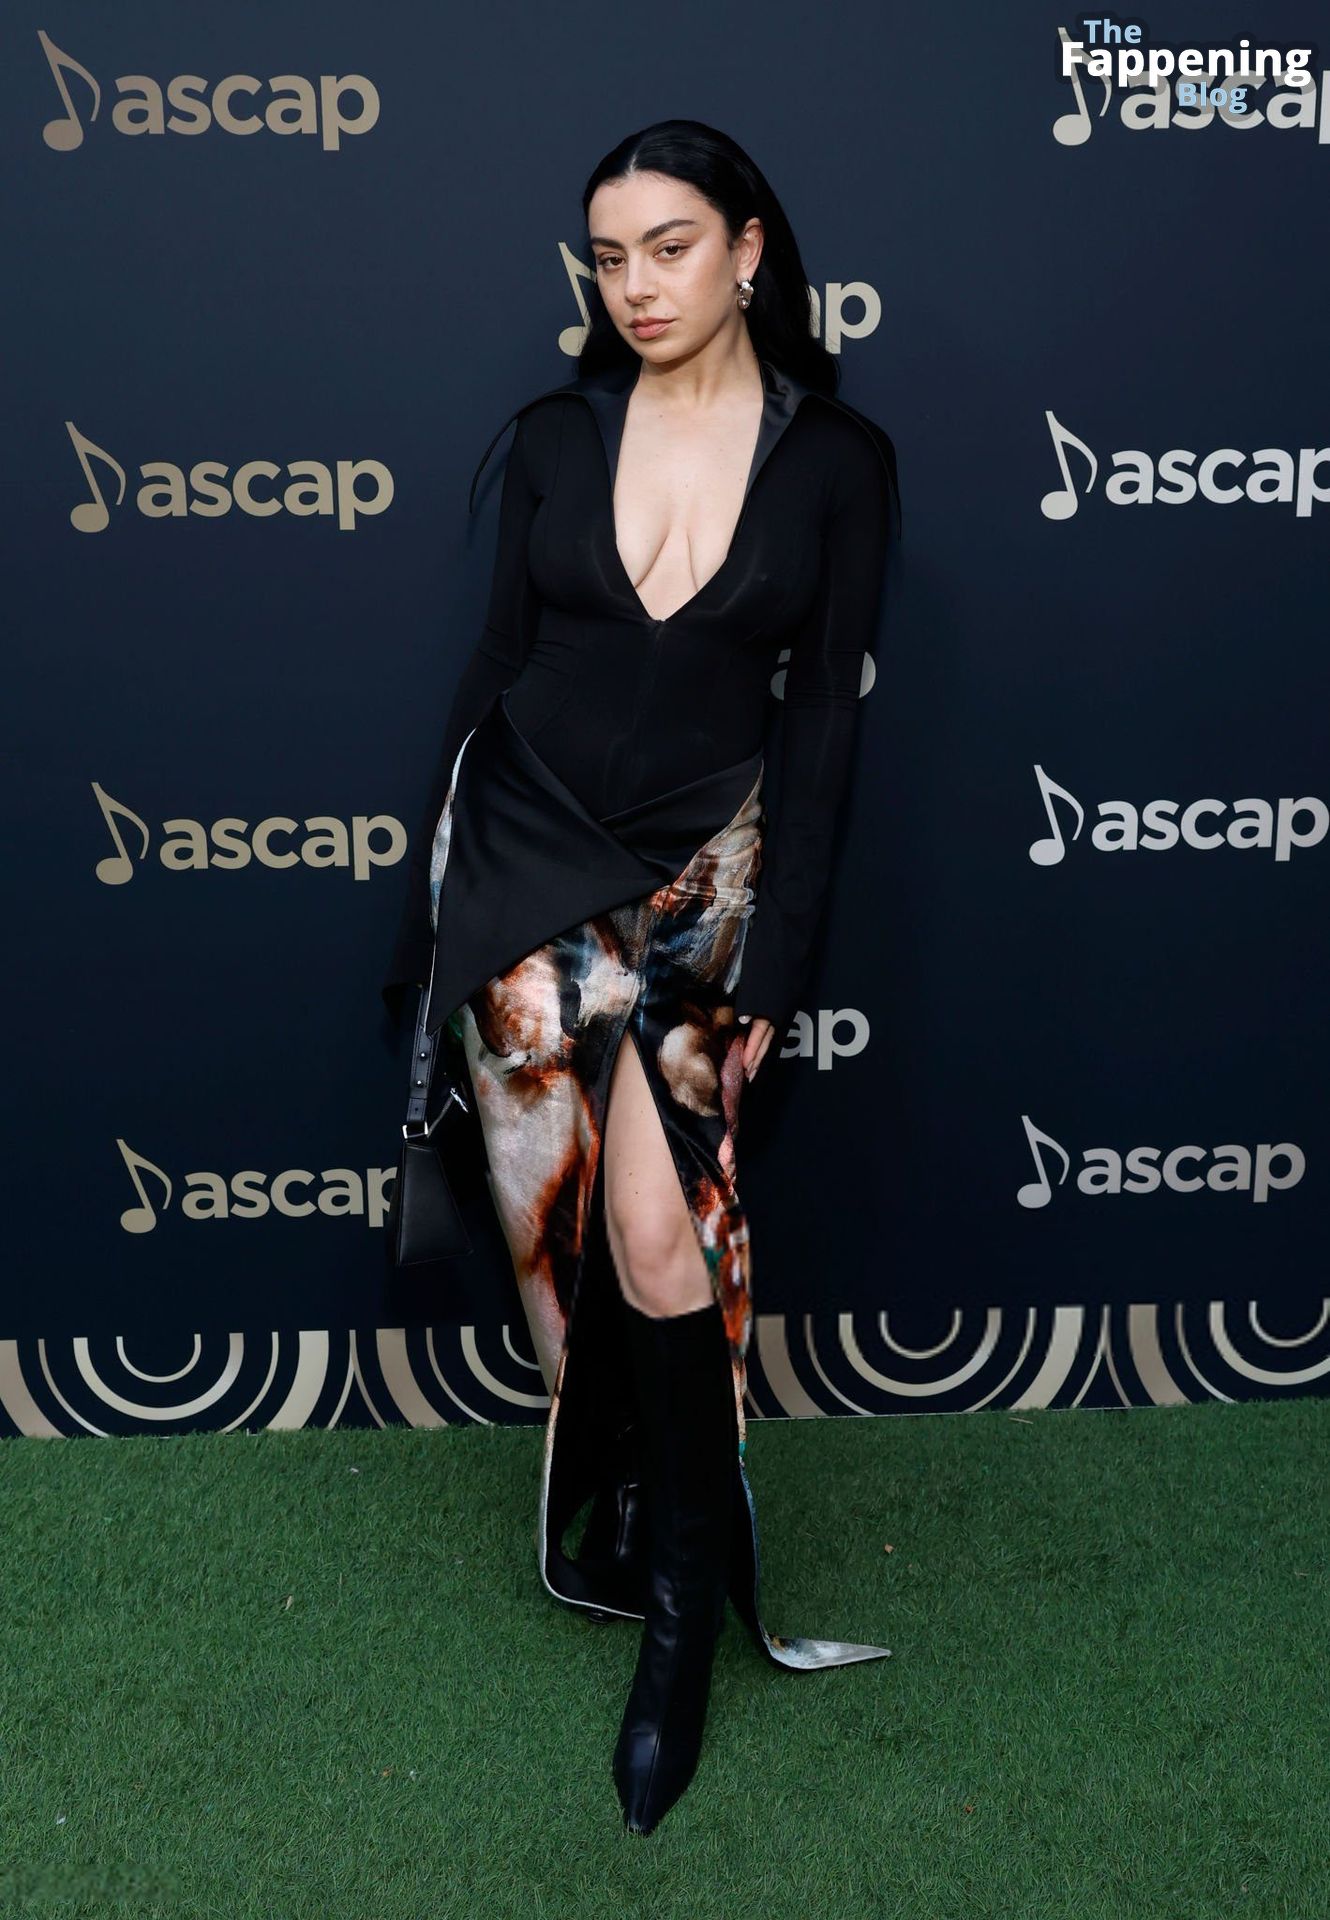 charli-xcx-braless-cleavage-ascap-pop-music-awards-1-thefappeningblog.com_.jpg